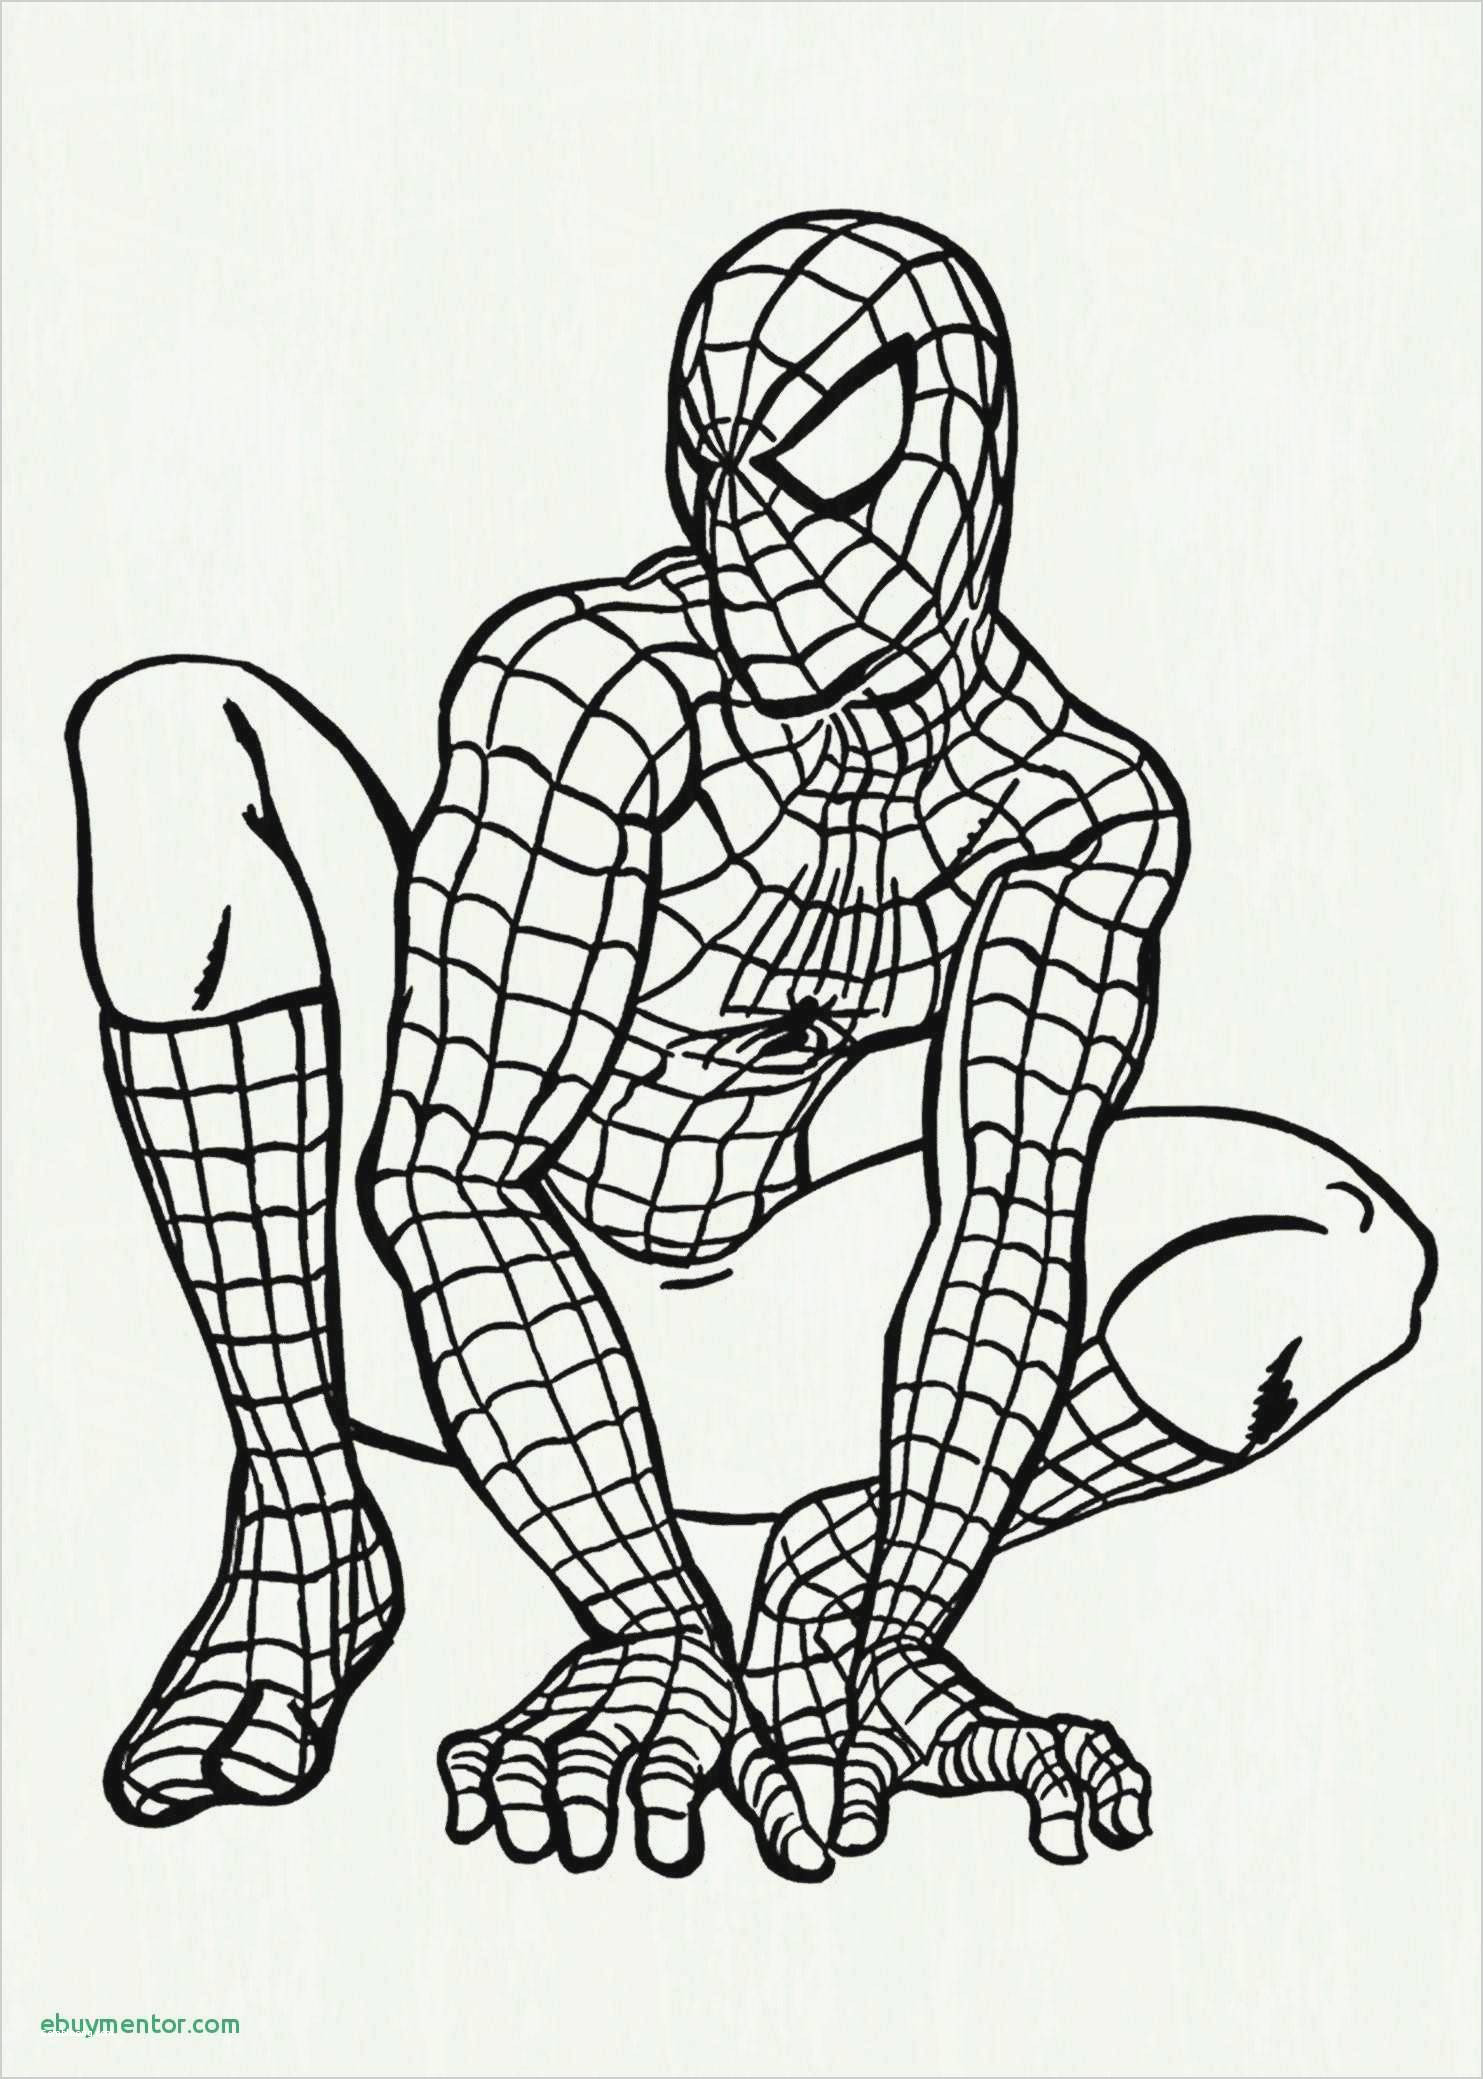 Coloring Pages Boys Tags : Coloring Pages for Kids Online Coloring ...